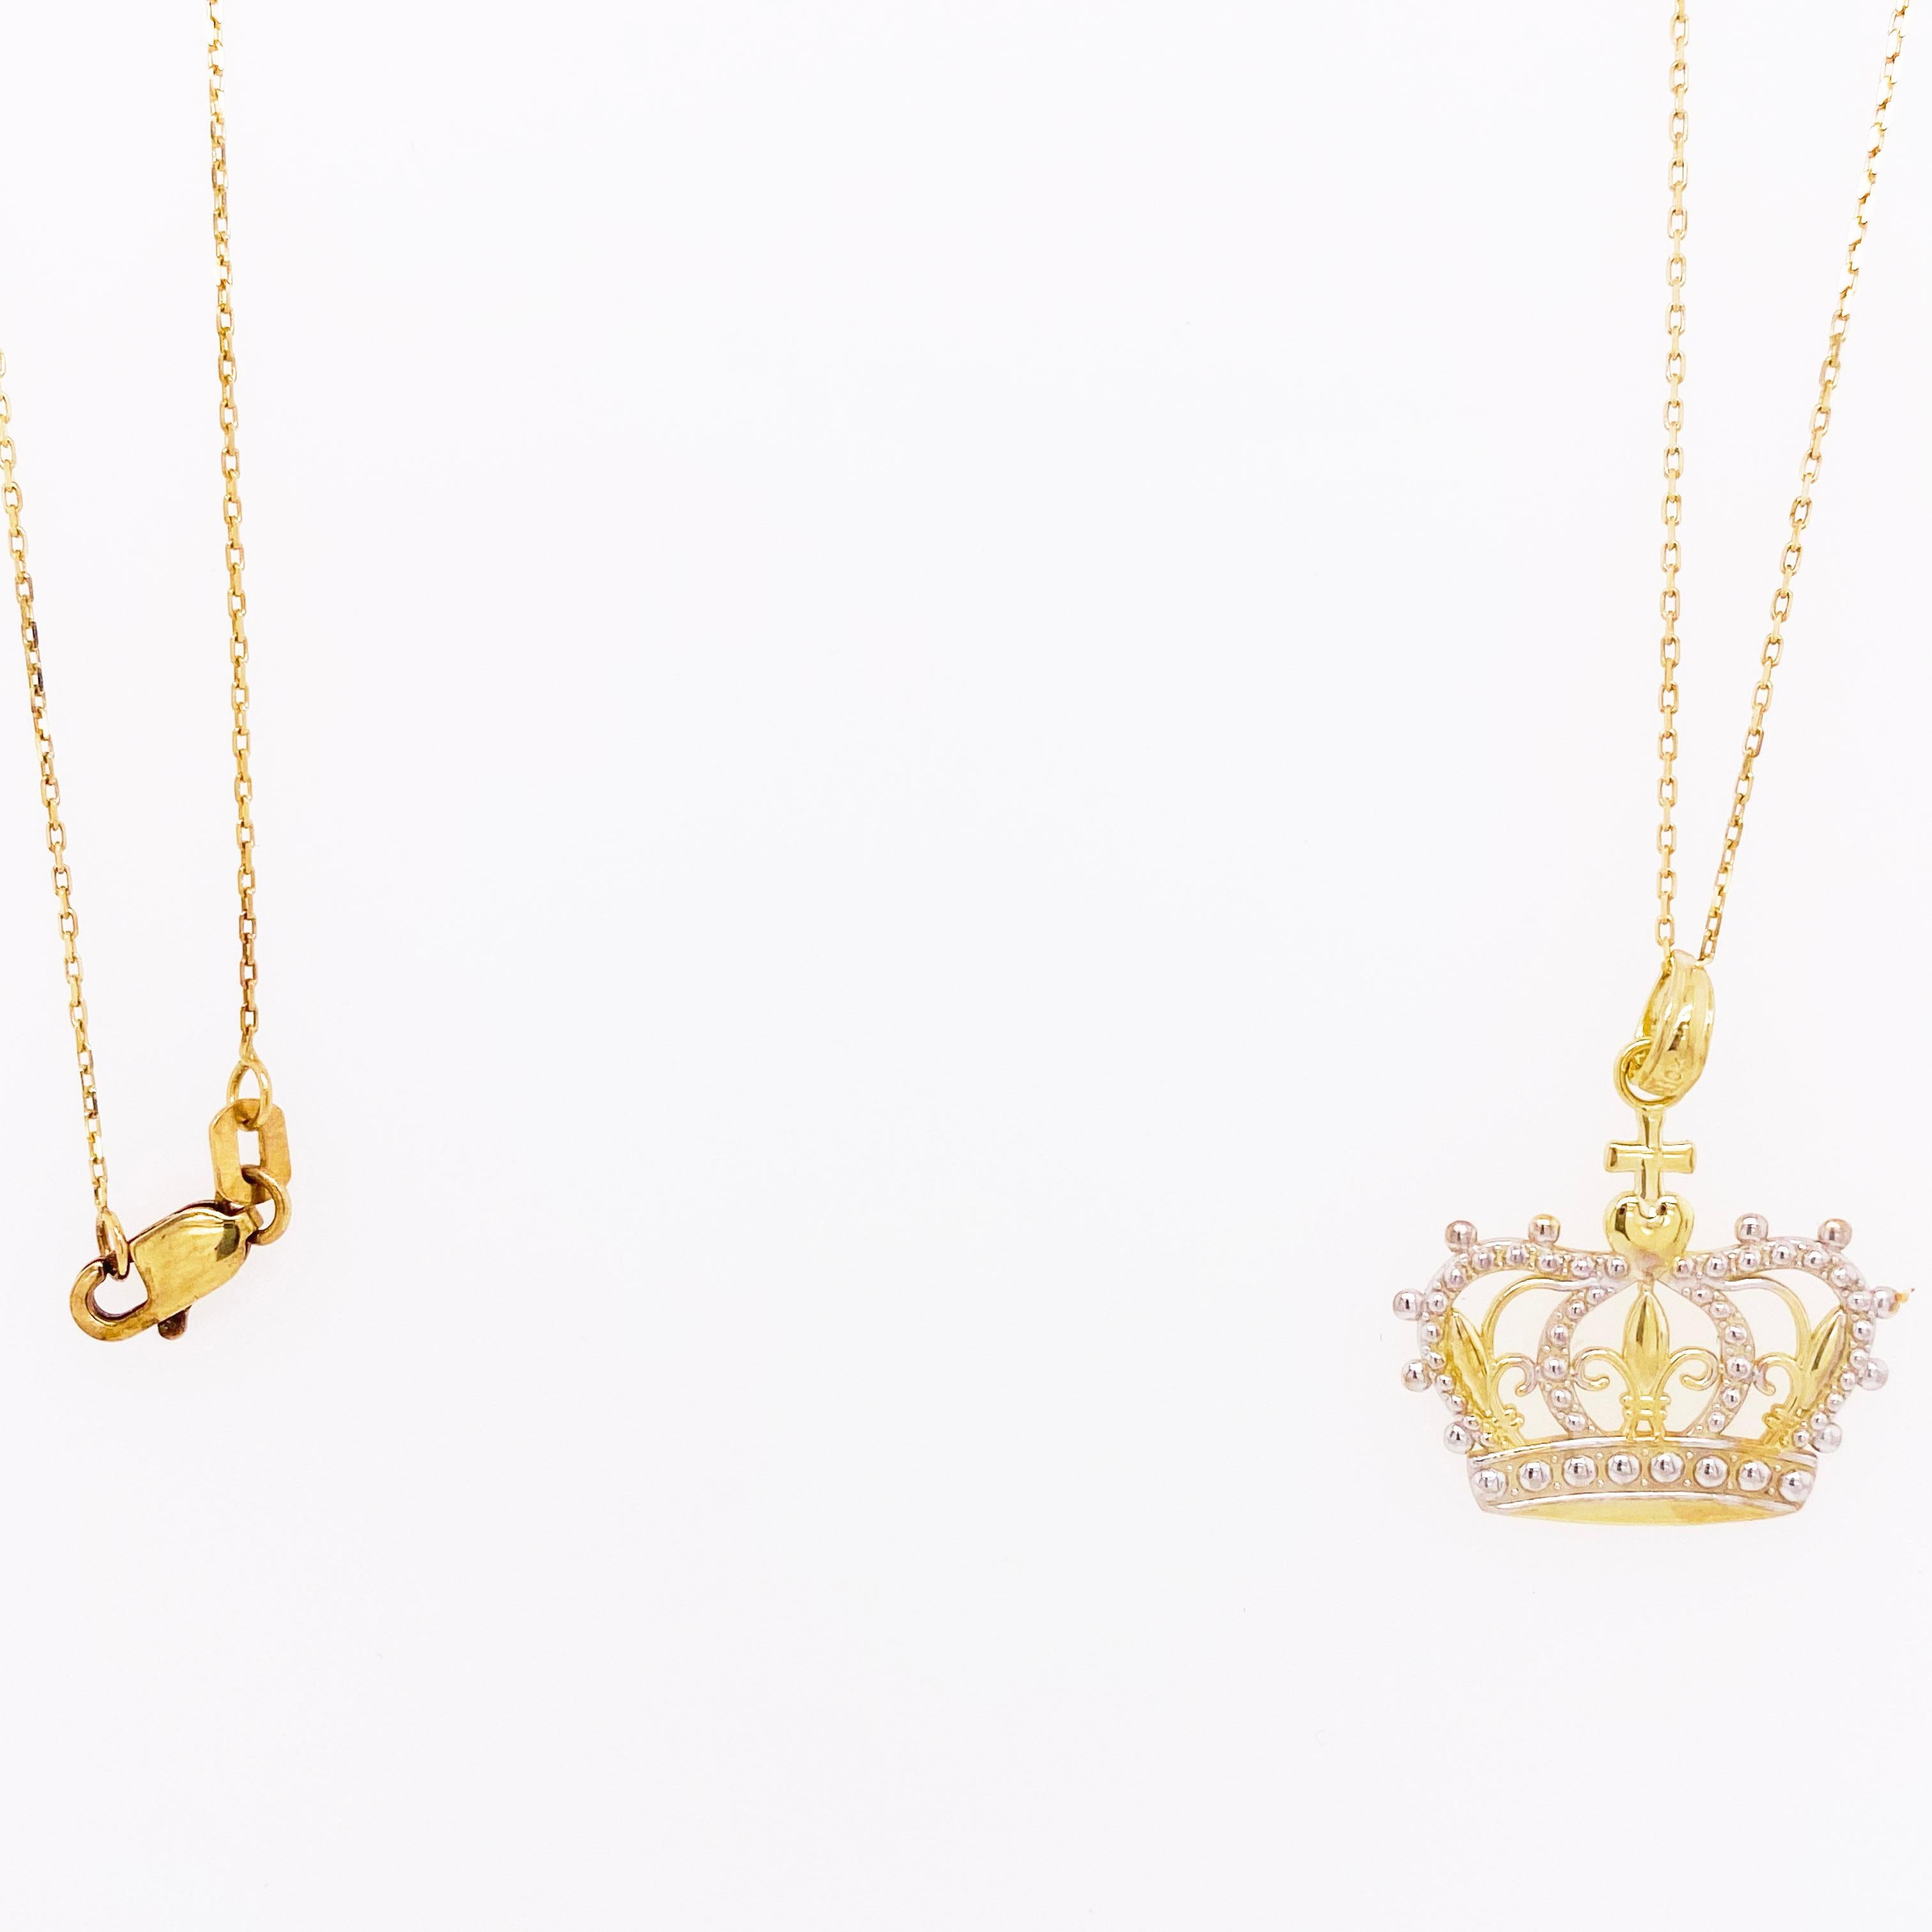 queen crown necklace gold